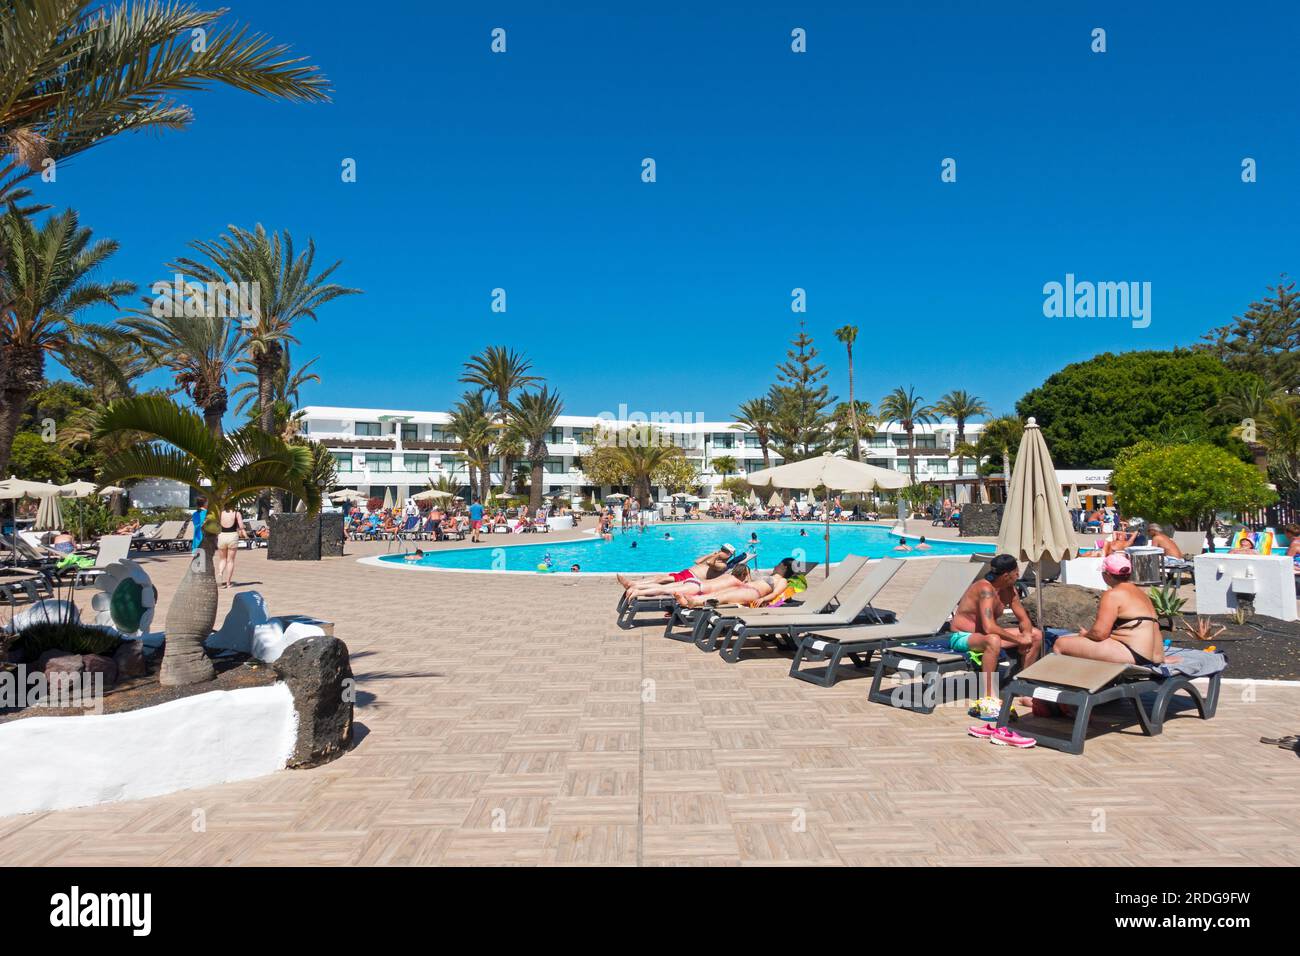 Typical view of guests sunning themselves around a swimming pool in a resort hotel on the island of Lanzarote, Canary Islands, Spain Stock Photo